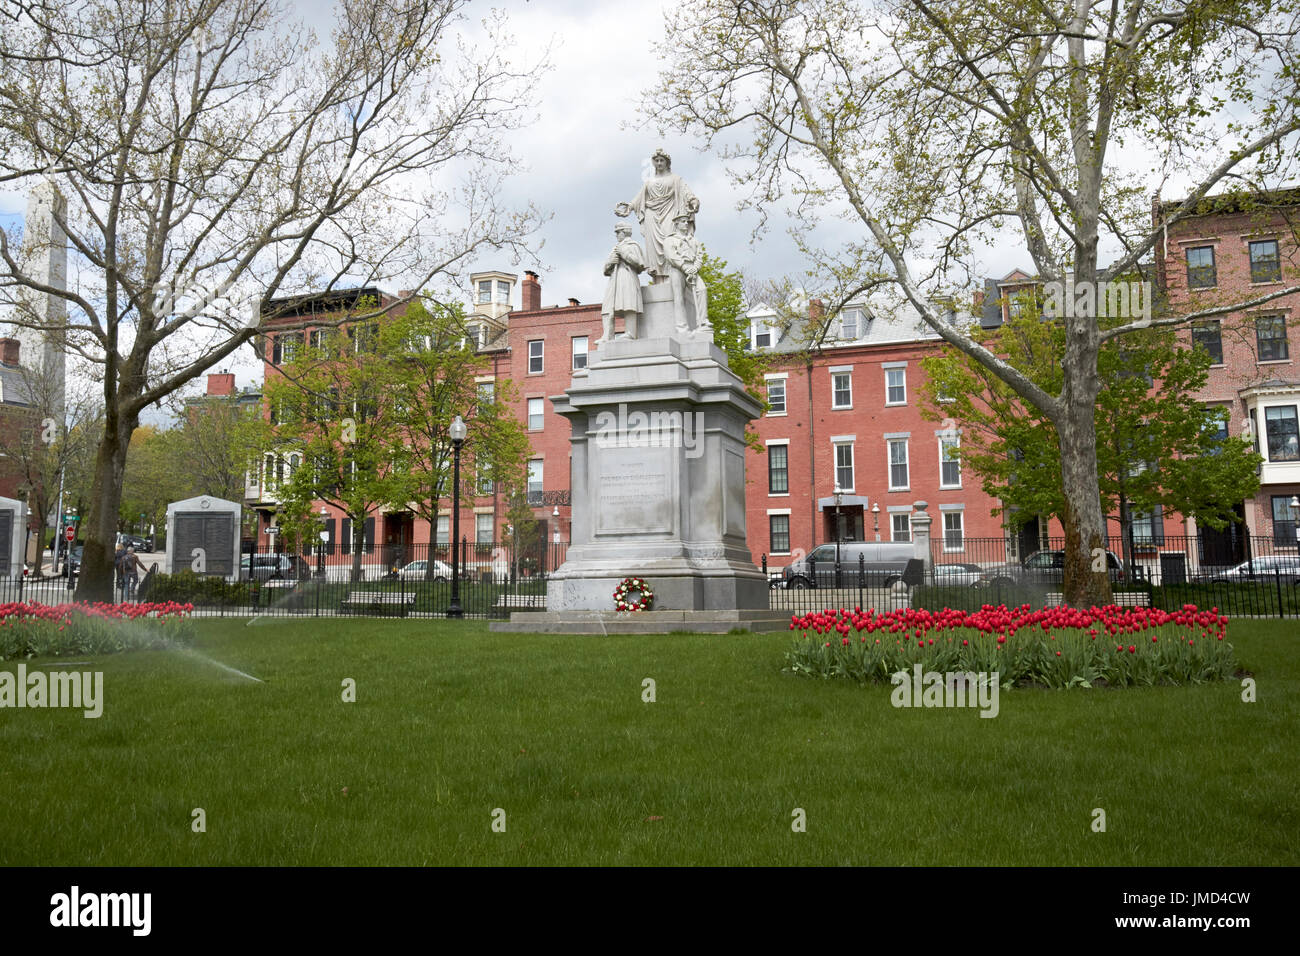 monument to the men who fought in the war of 1861 civil war The training field at winthrop square charlestown Boston USA Stock Photo